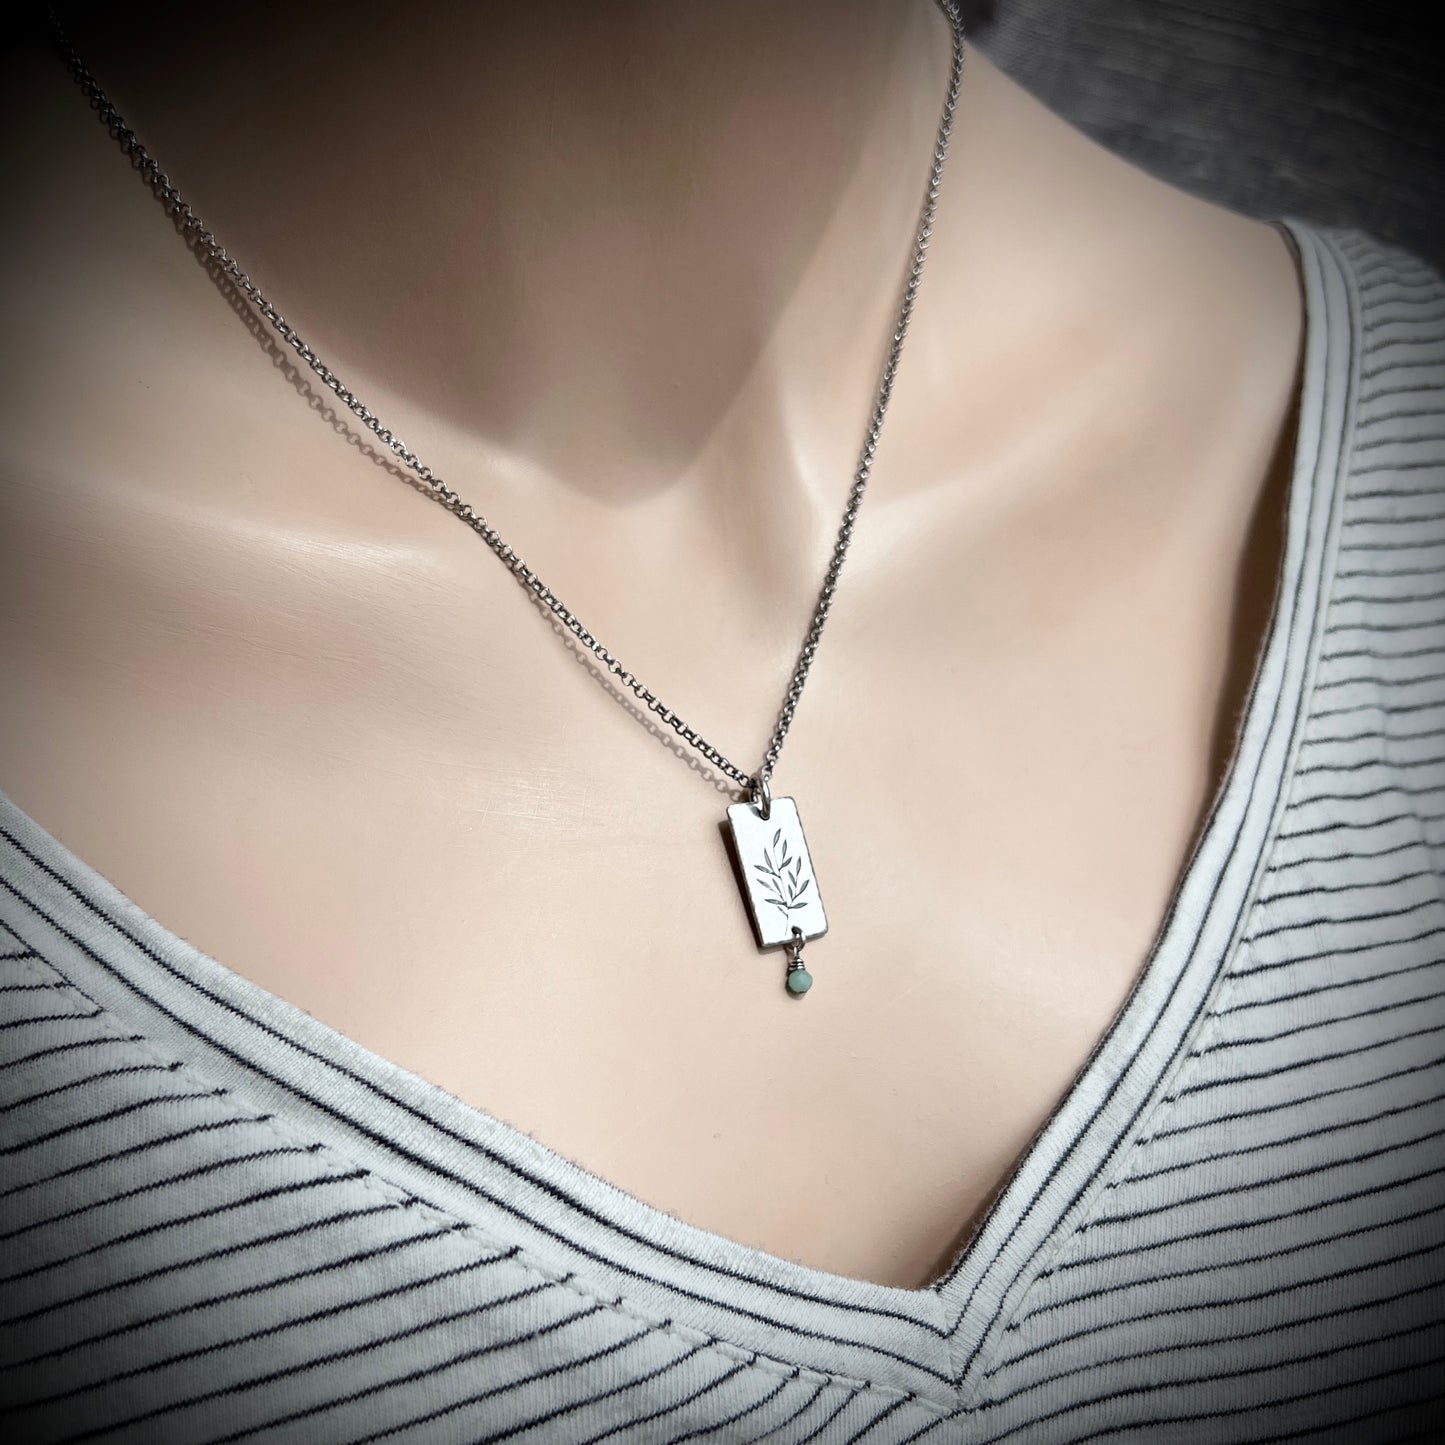 Customizable Sterling Silver Birthstone Necklace | Tiny Genuine Gemstone on Silver Branch Pendant